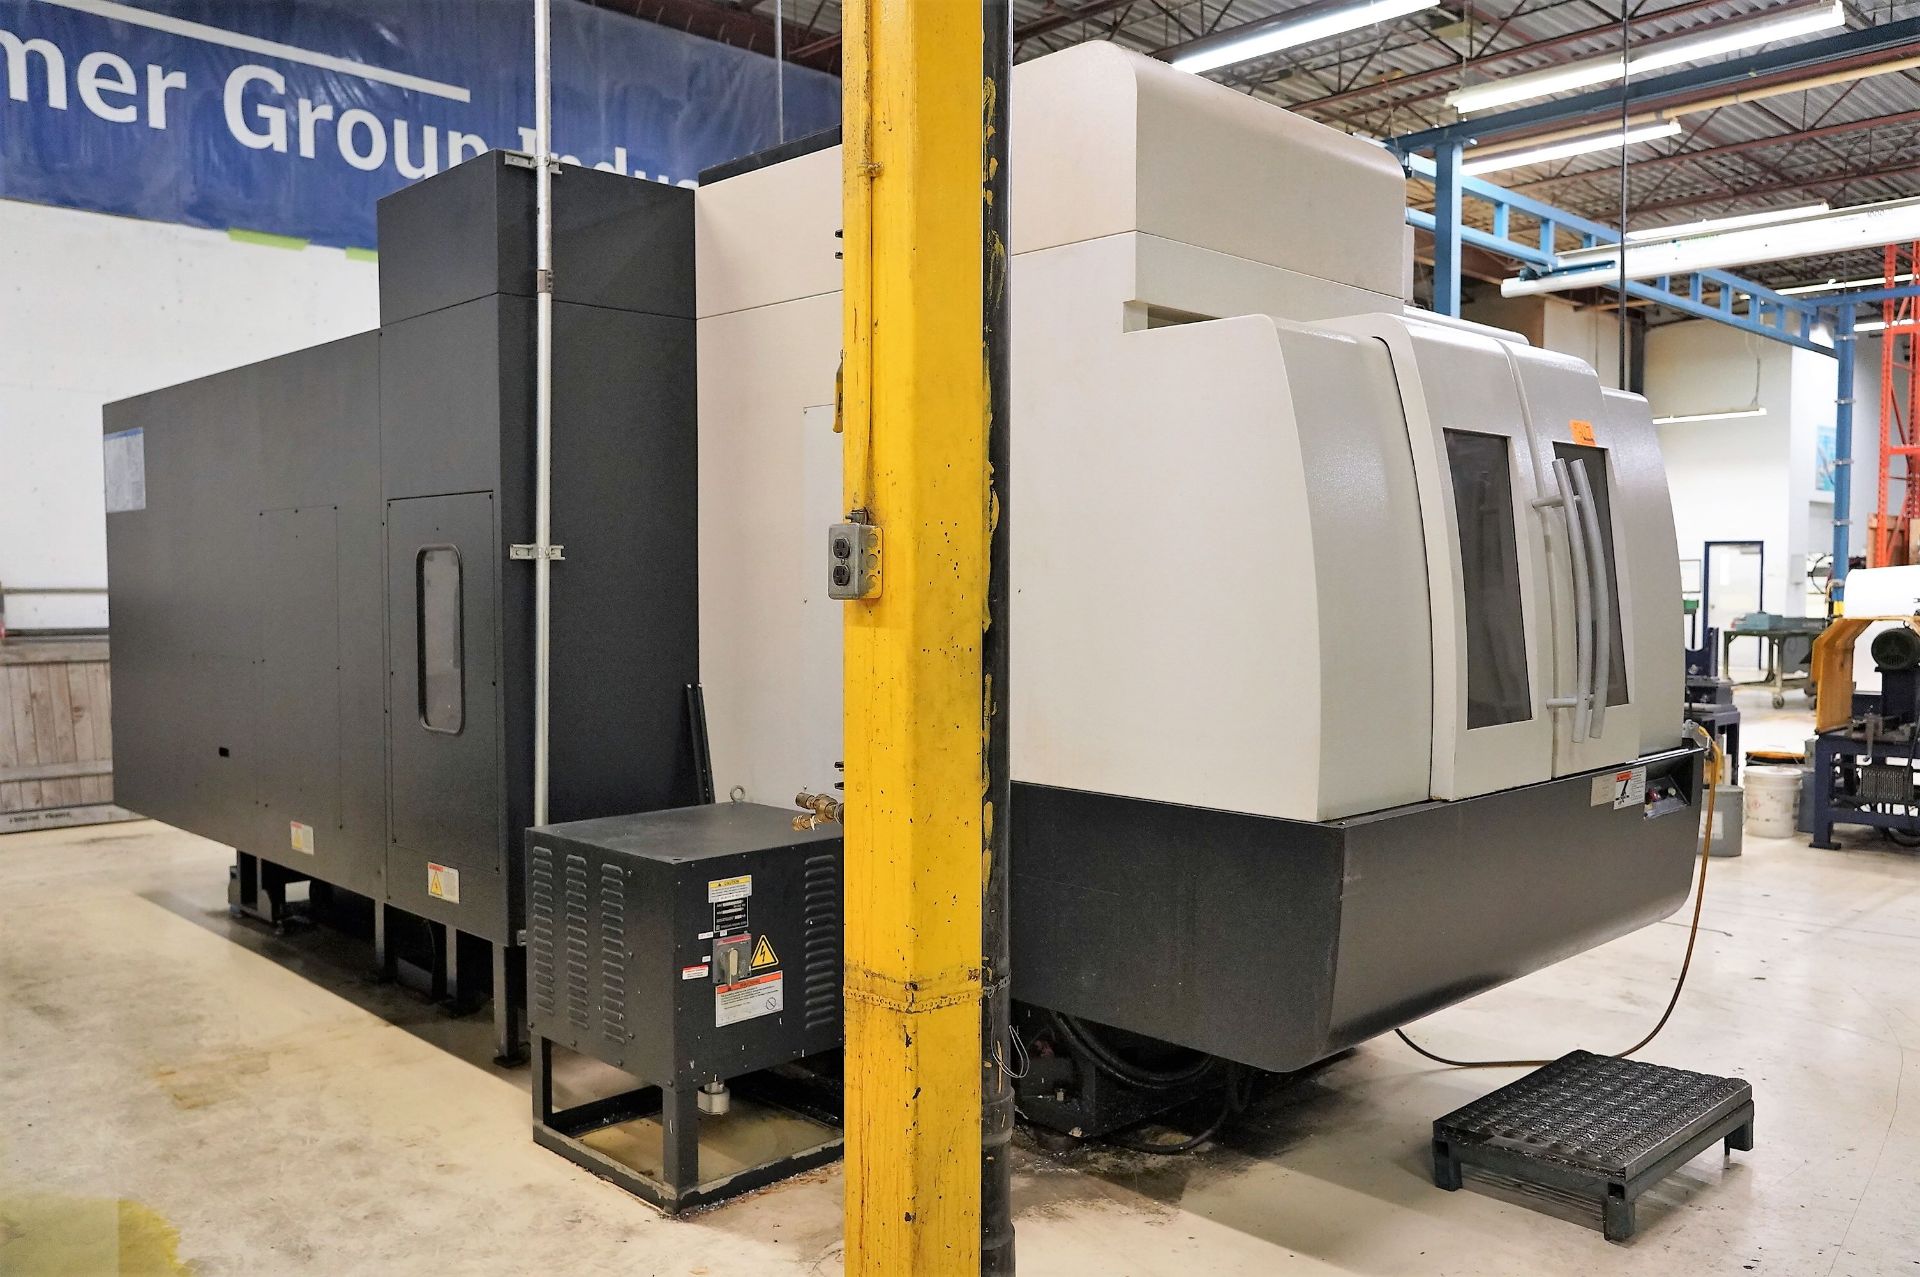 2008 Mazak Variax 630-5X-II 5-Axis CNC Vertical Machining Center With Trunnion Table, Pallet Changer - Image 9 of 17